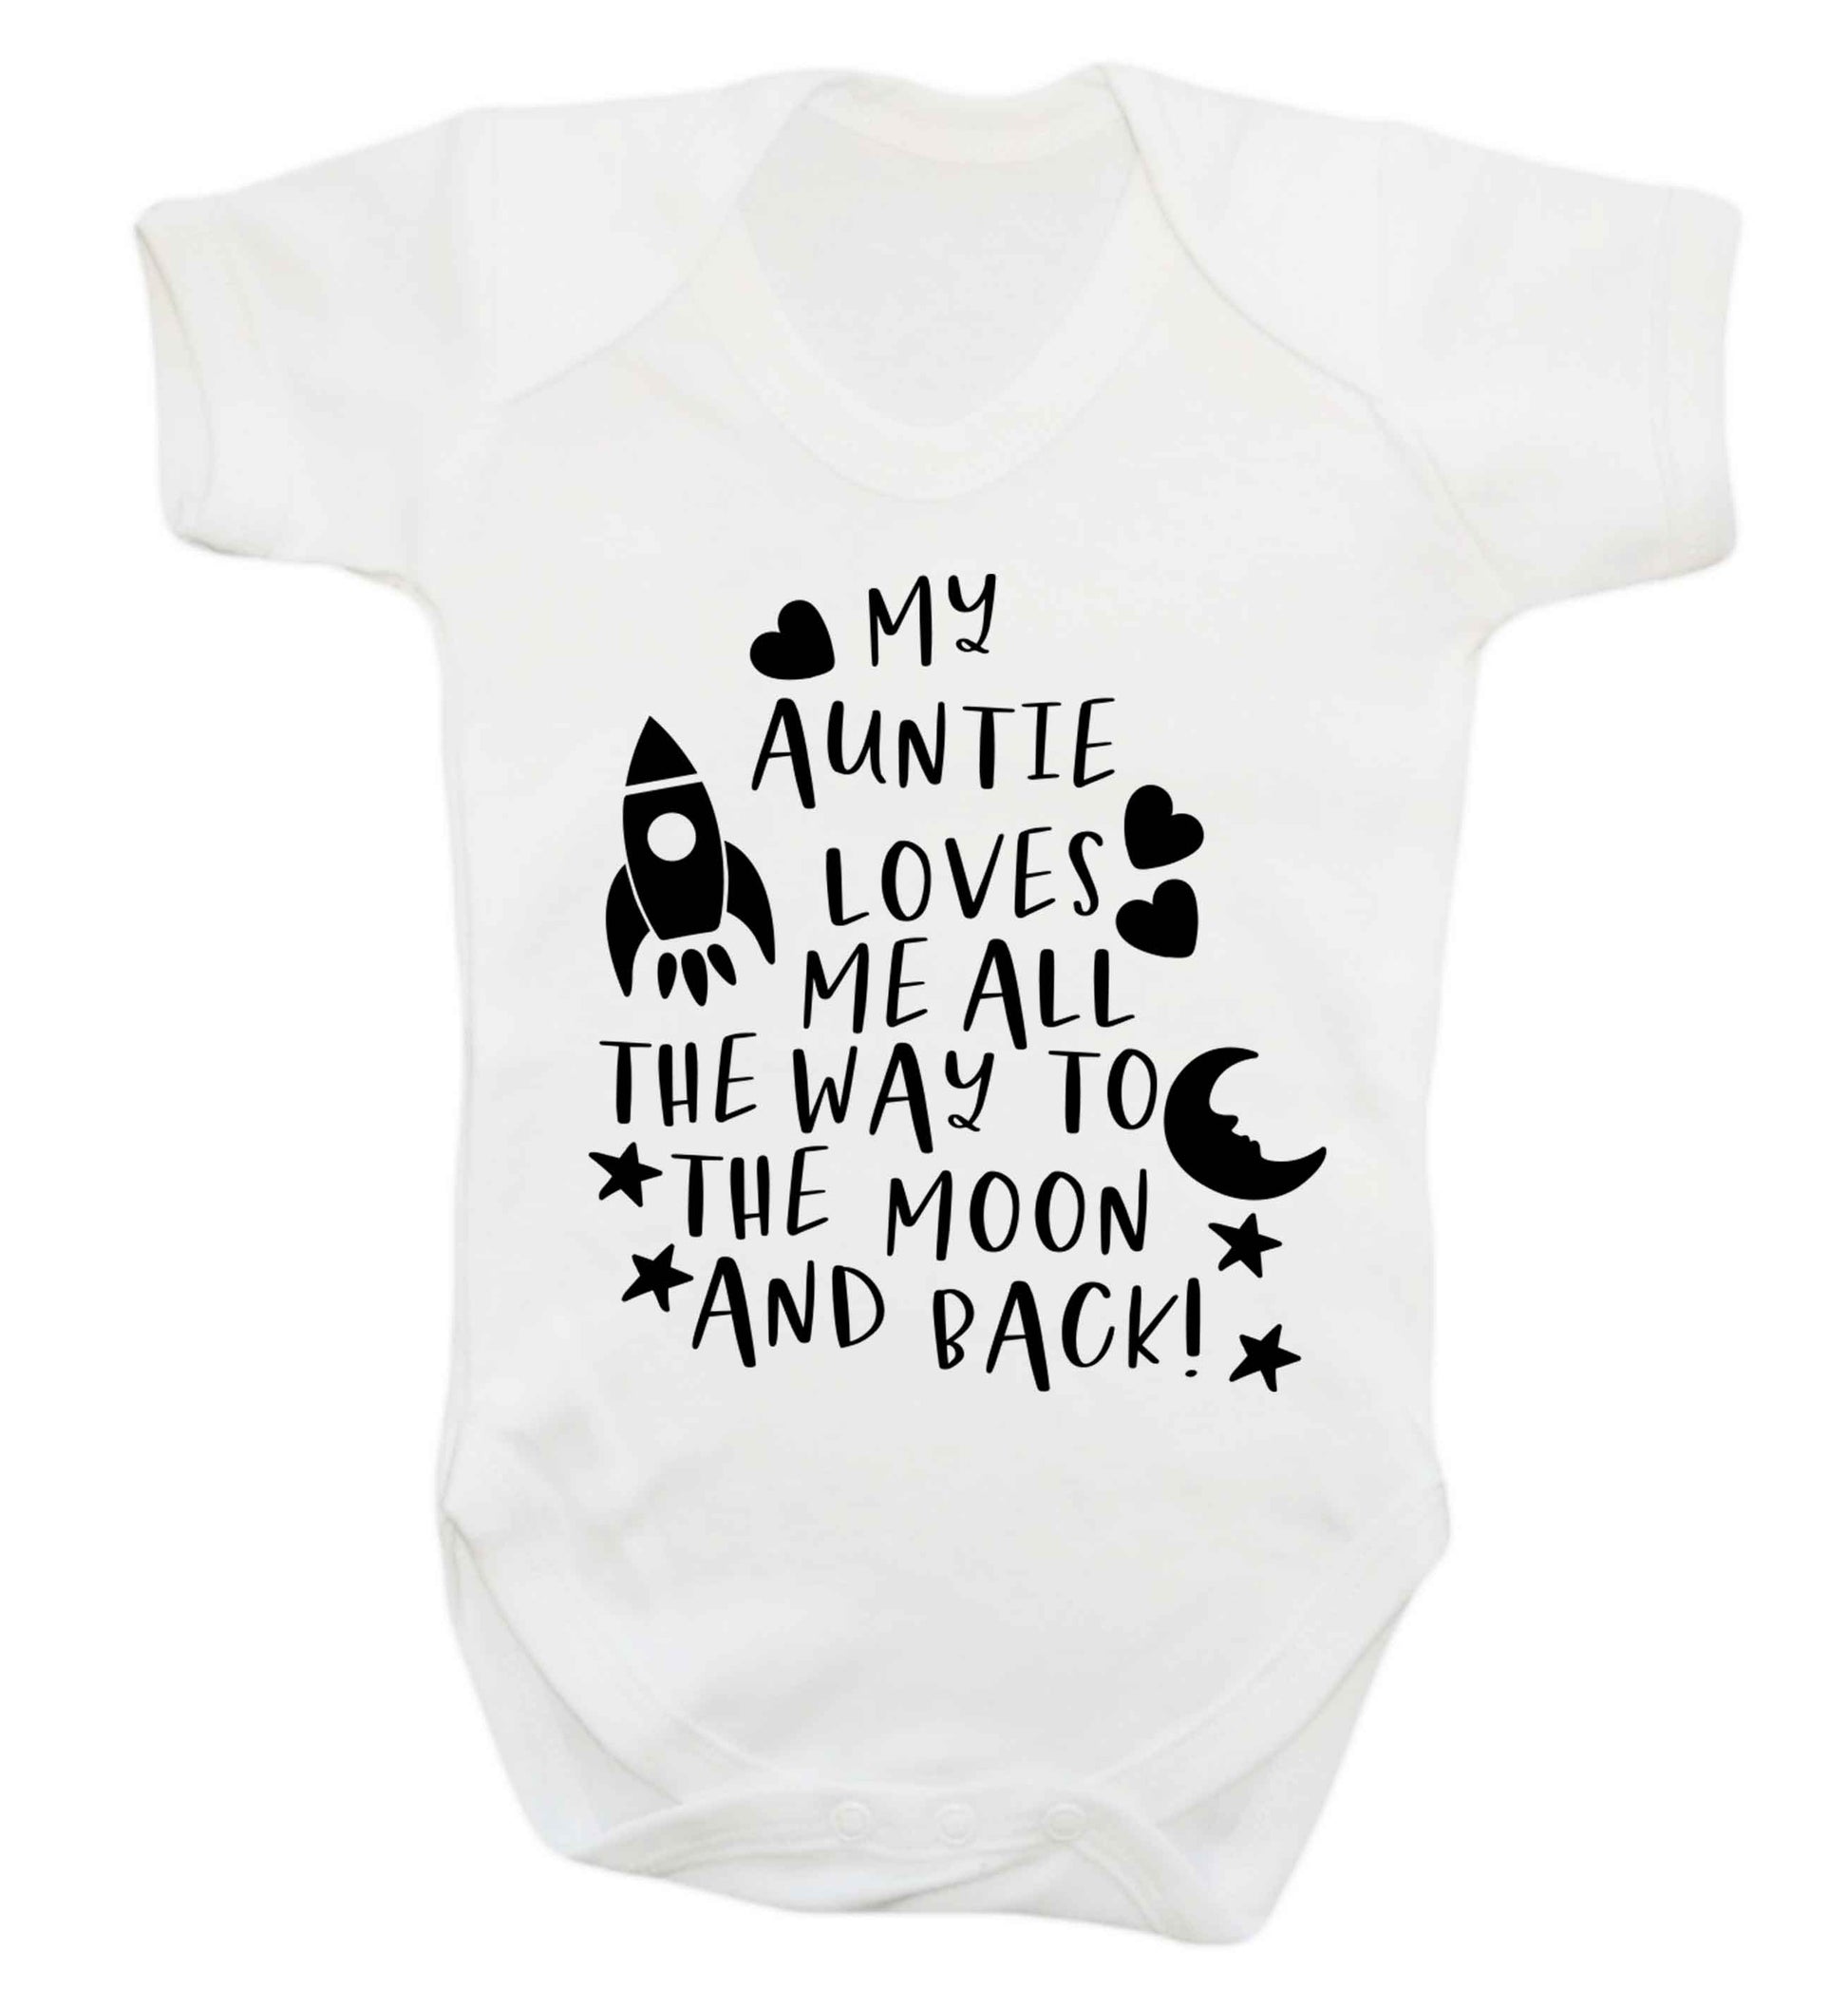 My auntie loves me all the way to the moon and back Baby Vest white 18-24 months